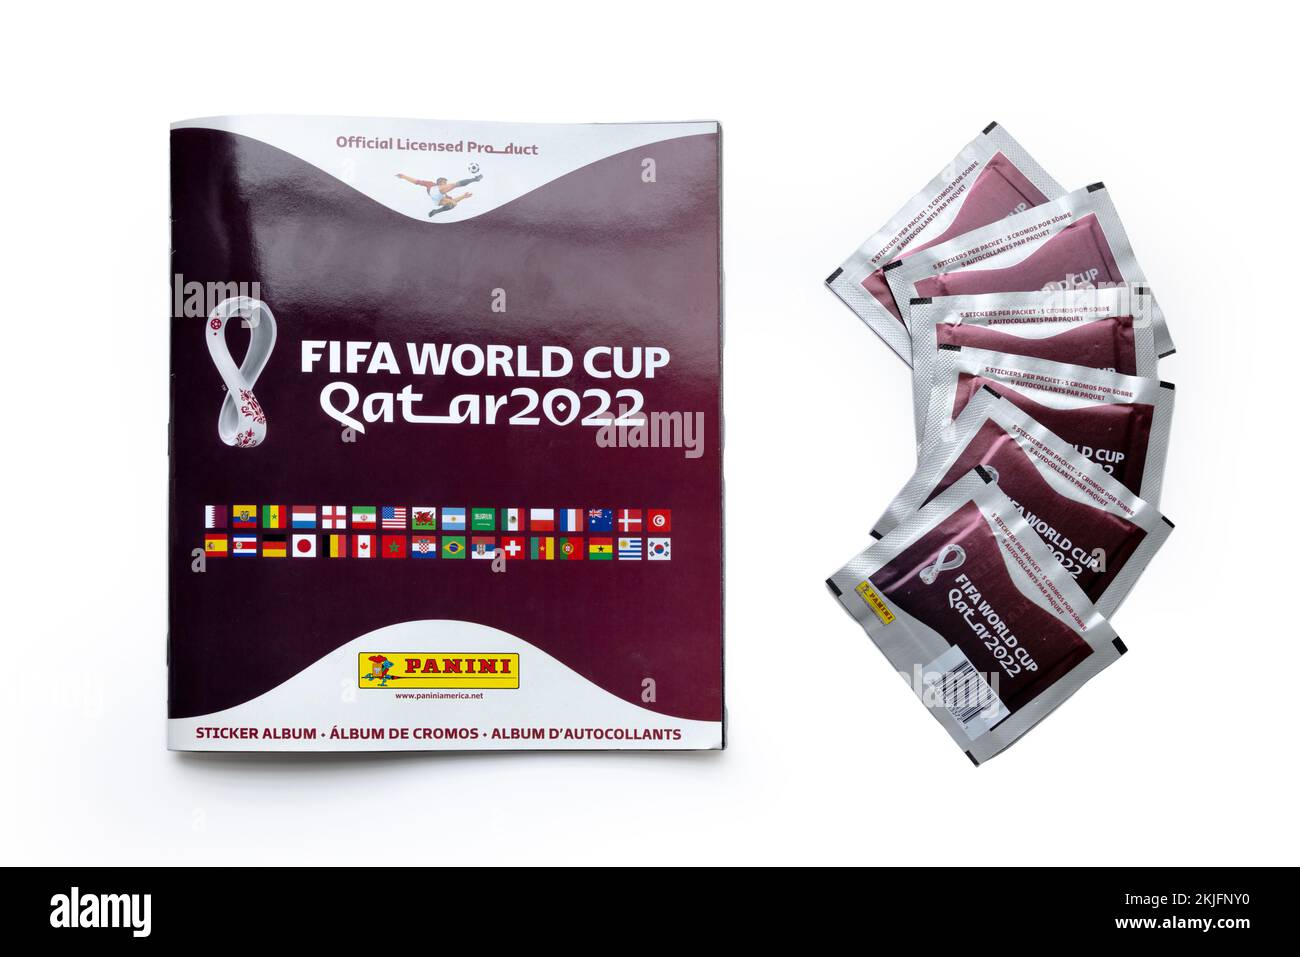 PANINI 2014, 2018, 2022 FIFA WORLD CUP STICKER ALBUMS-OFFICIAL LICENSED  PRODUCTS